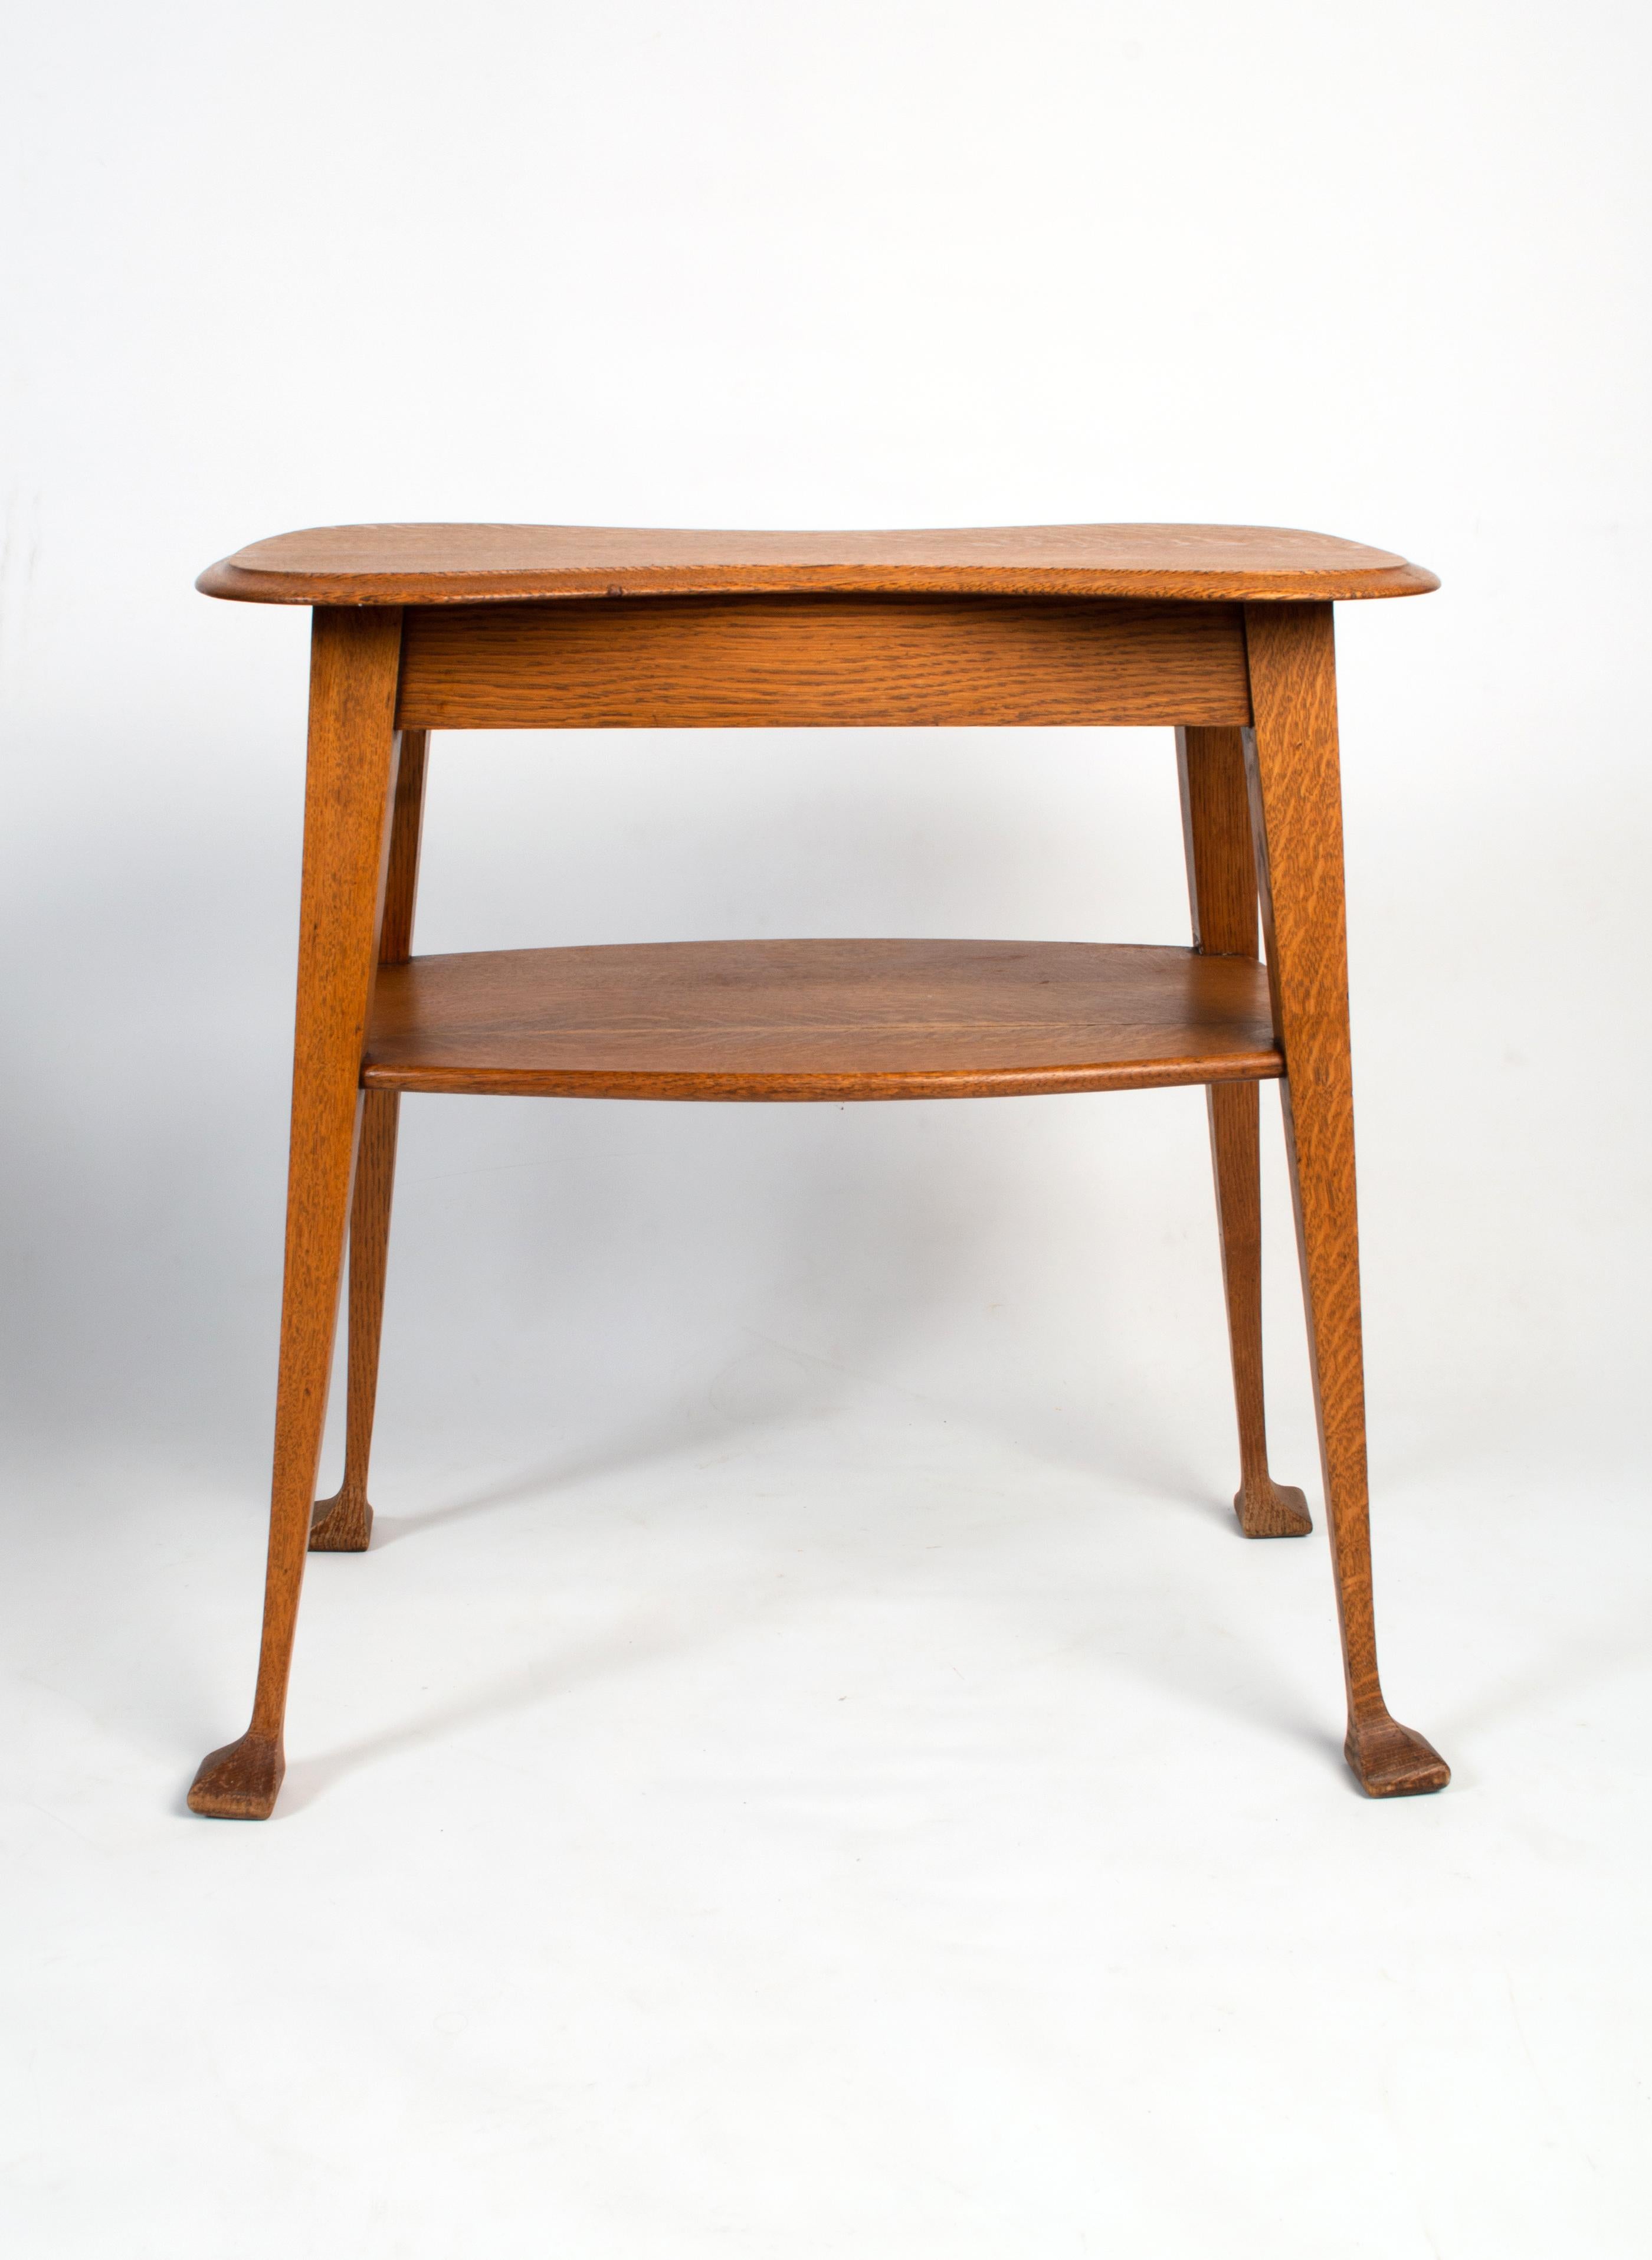 Arts and Crafts Antique English Shapland & Petter Arts & Crafts Golden Oak Side Table C.1890 For Sale